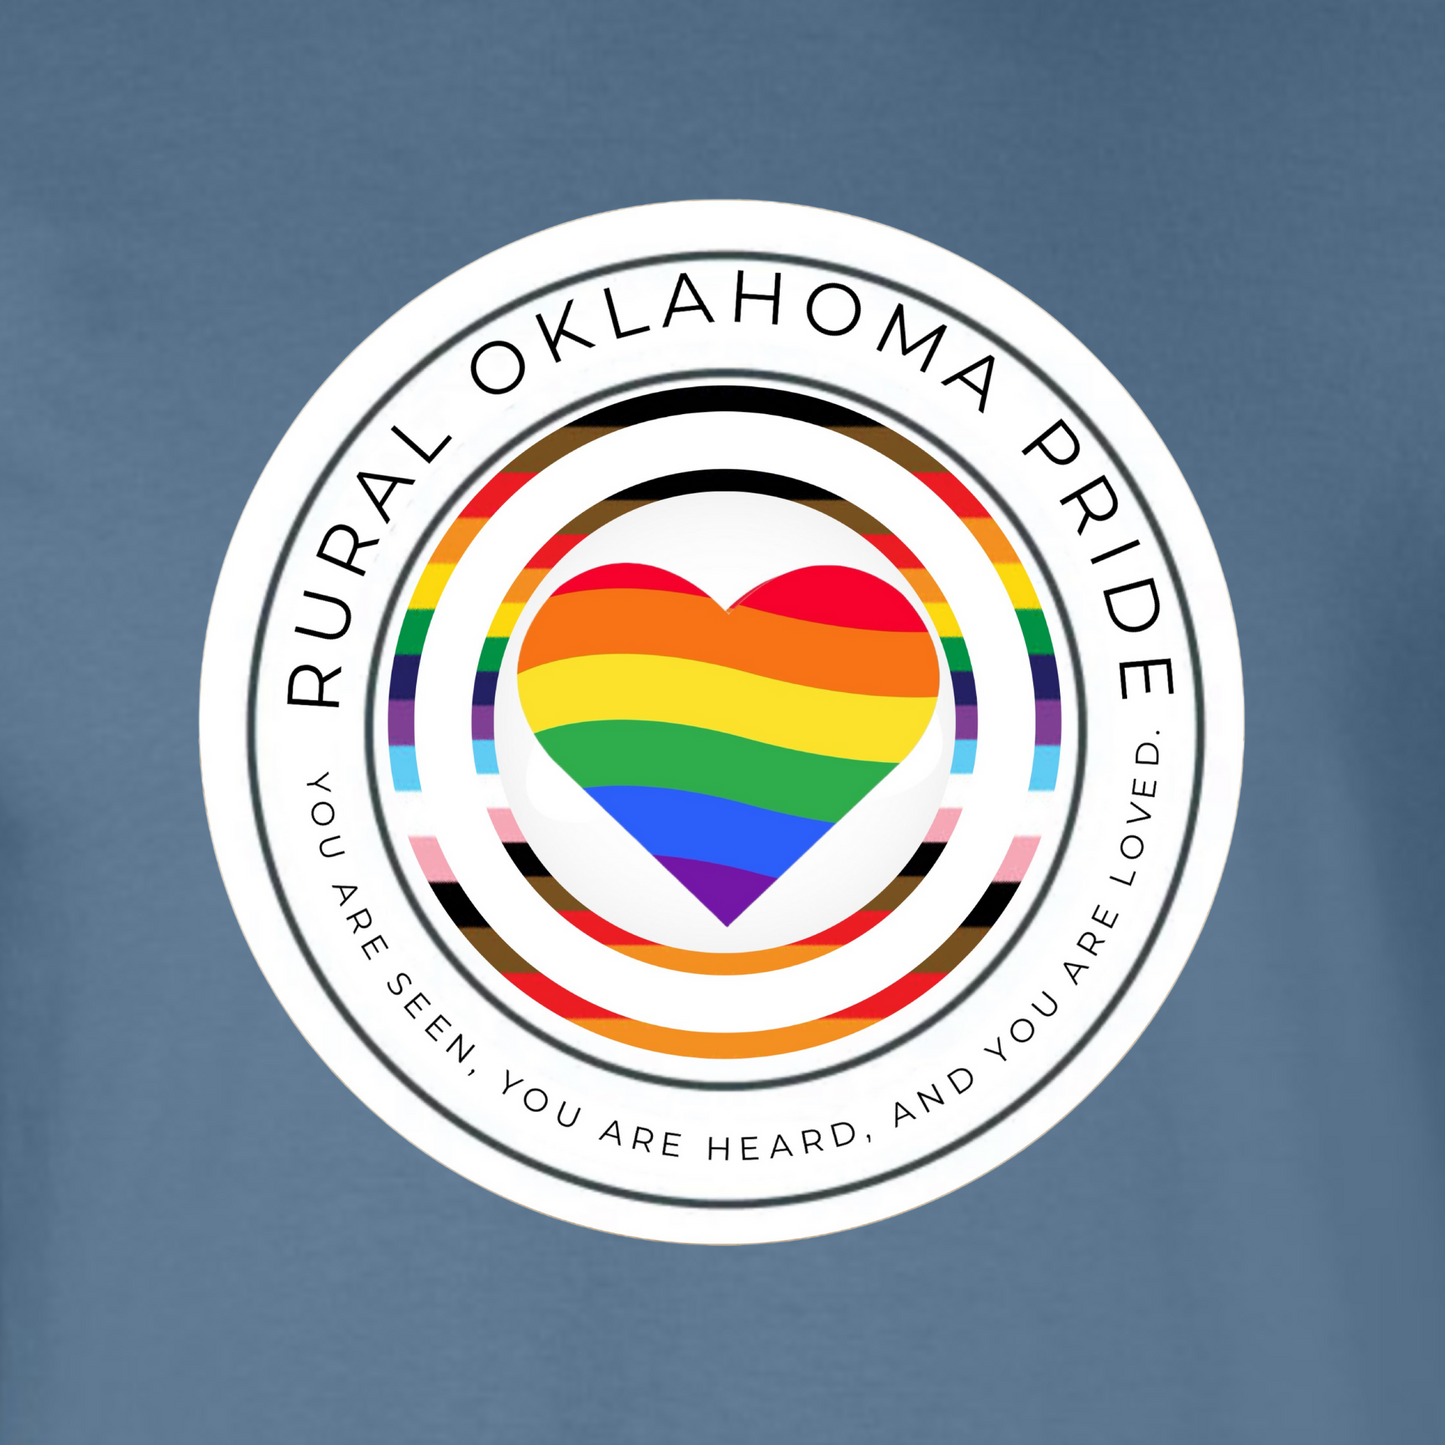 On an indigo blue background is the rural oklahoma pride logo. The logo has Rural Oklahoma Pride written along the top half of a white circle. The bottom half reads You are seen You are Heard and You are Loved there is the outline of another circle the colors of the Daniel Qasar pride flag with an identical outline slightly smaller inside of it. At the very center of the design is a heart that is colored with waves of color that form the rainbow. 